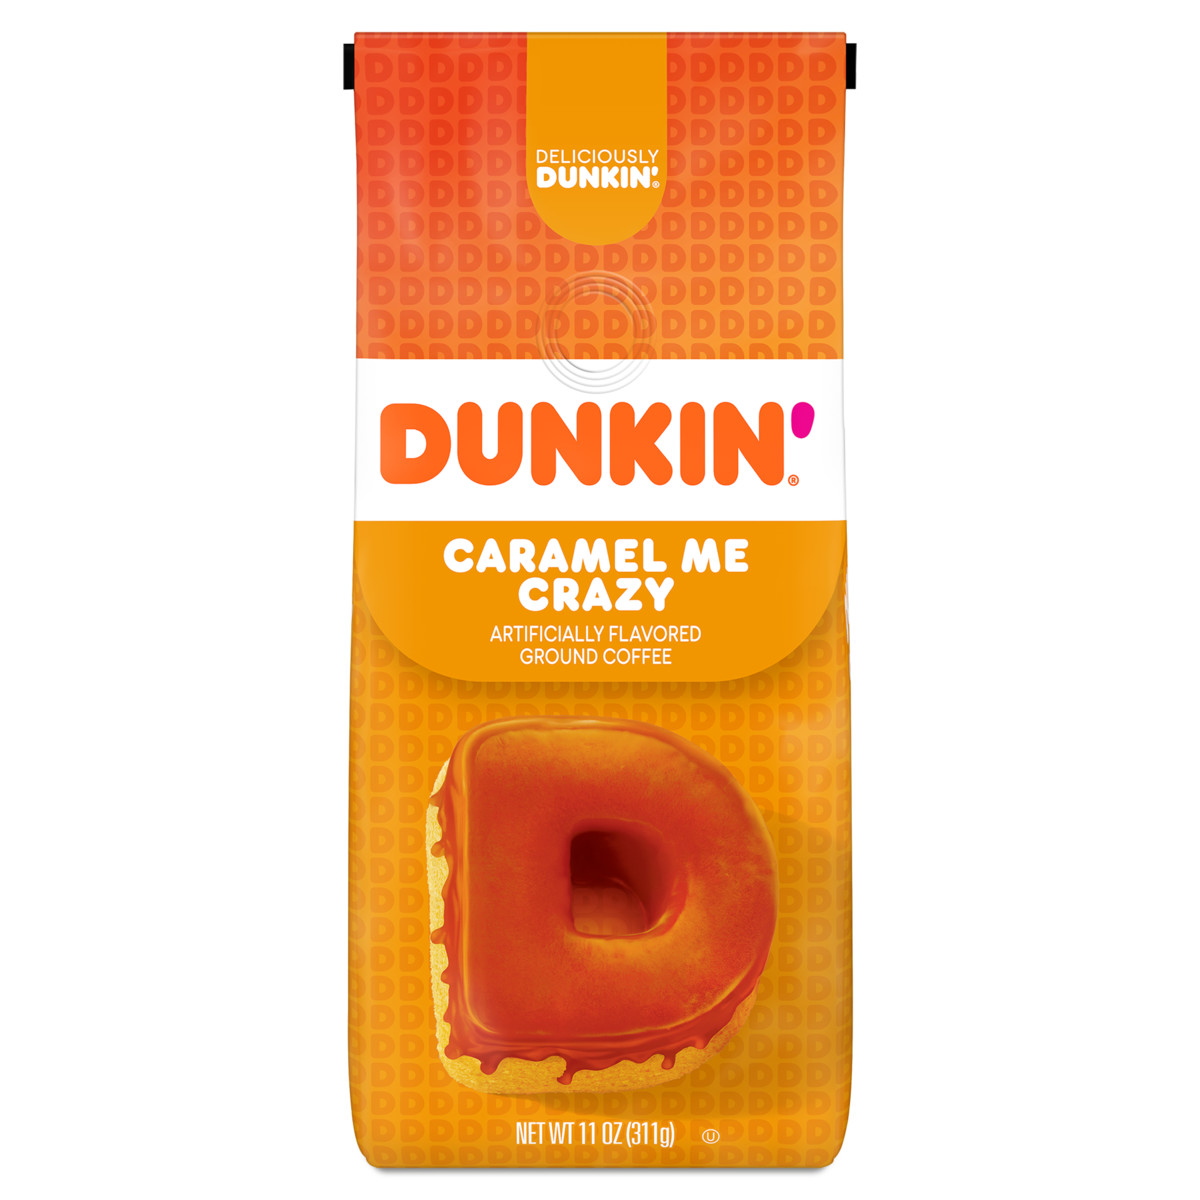 Dunkin'® Caramel Me Crazy Artificially Flavored ground caramel coffee in an amber bag with an image of a caramel covered letter "D" on it